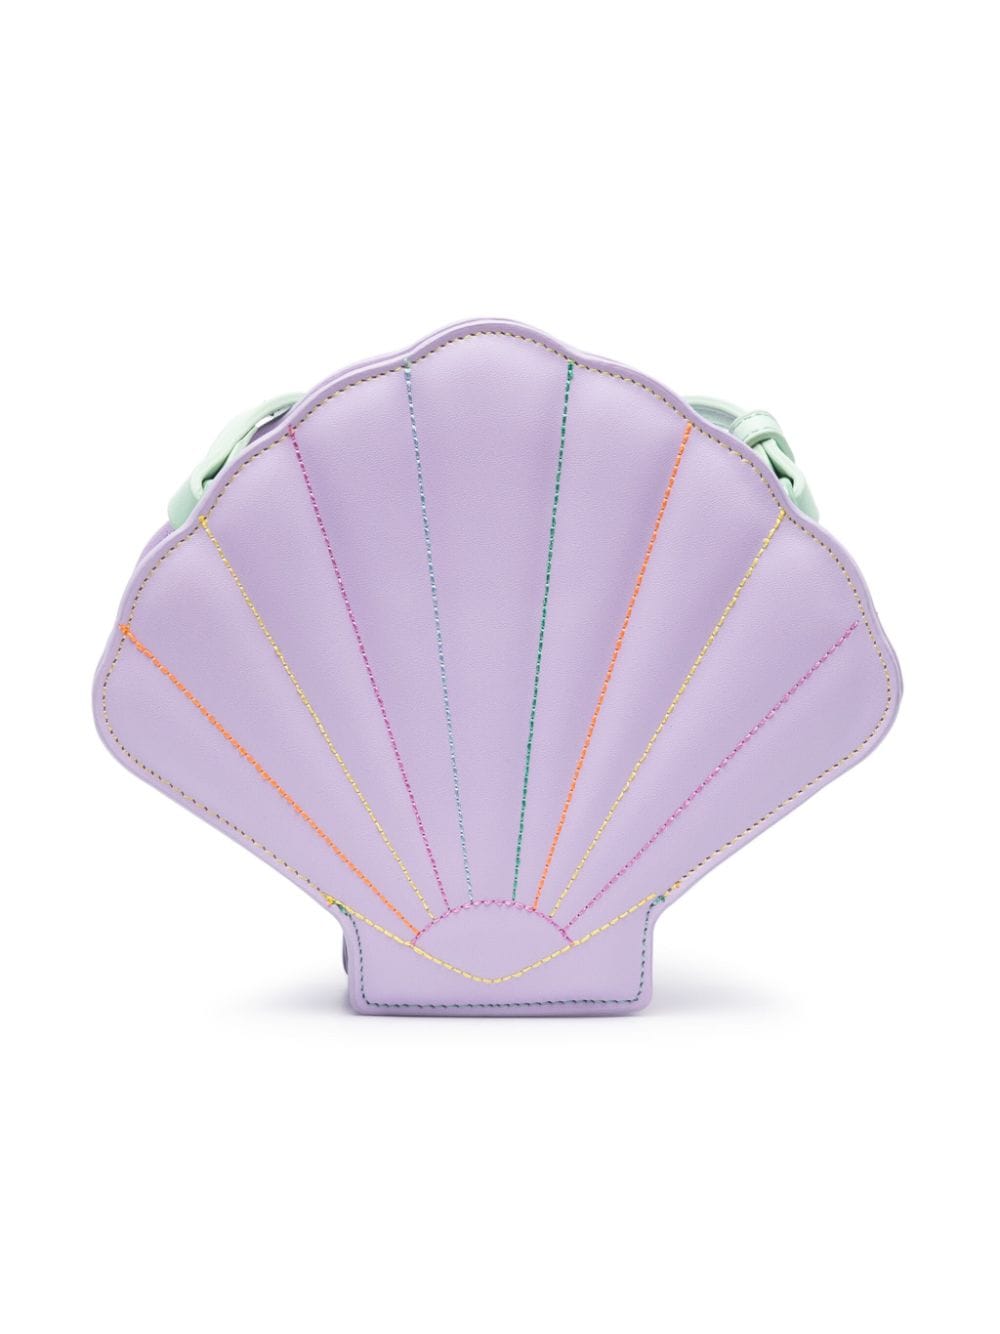 Lilac bag for girls with shell shape